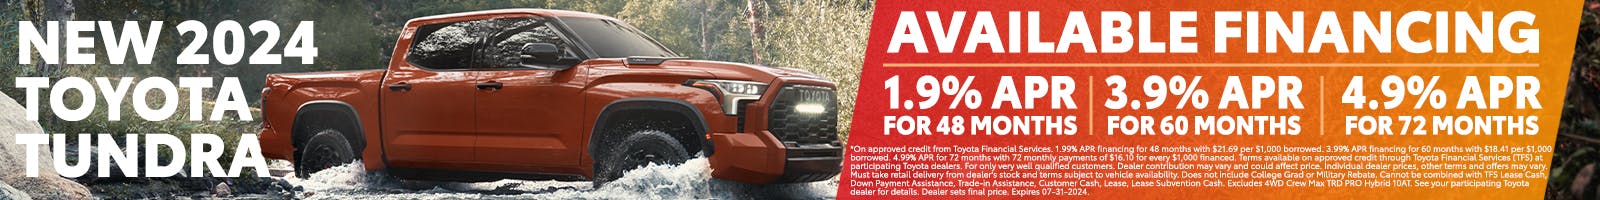 Tundra Financing Offers